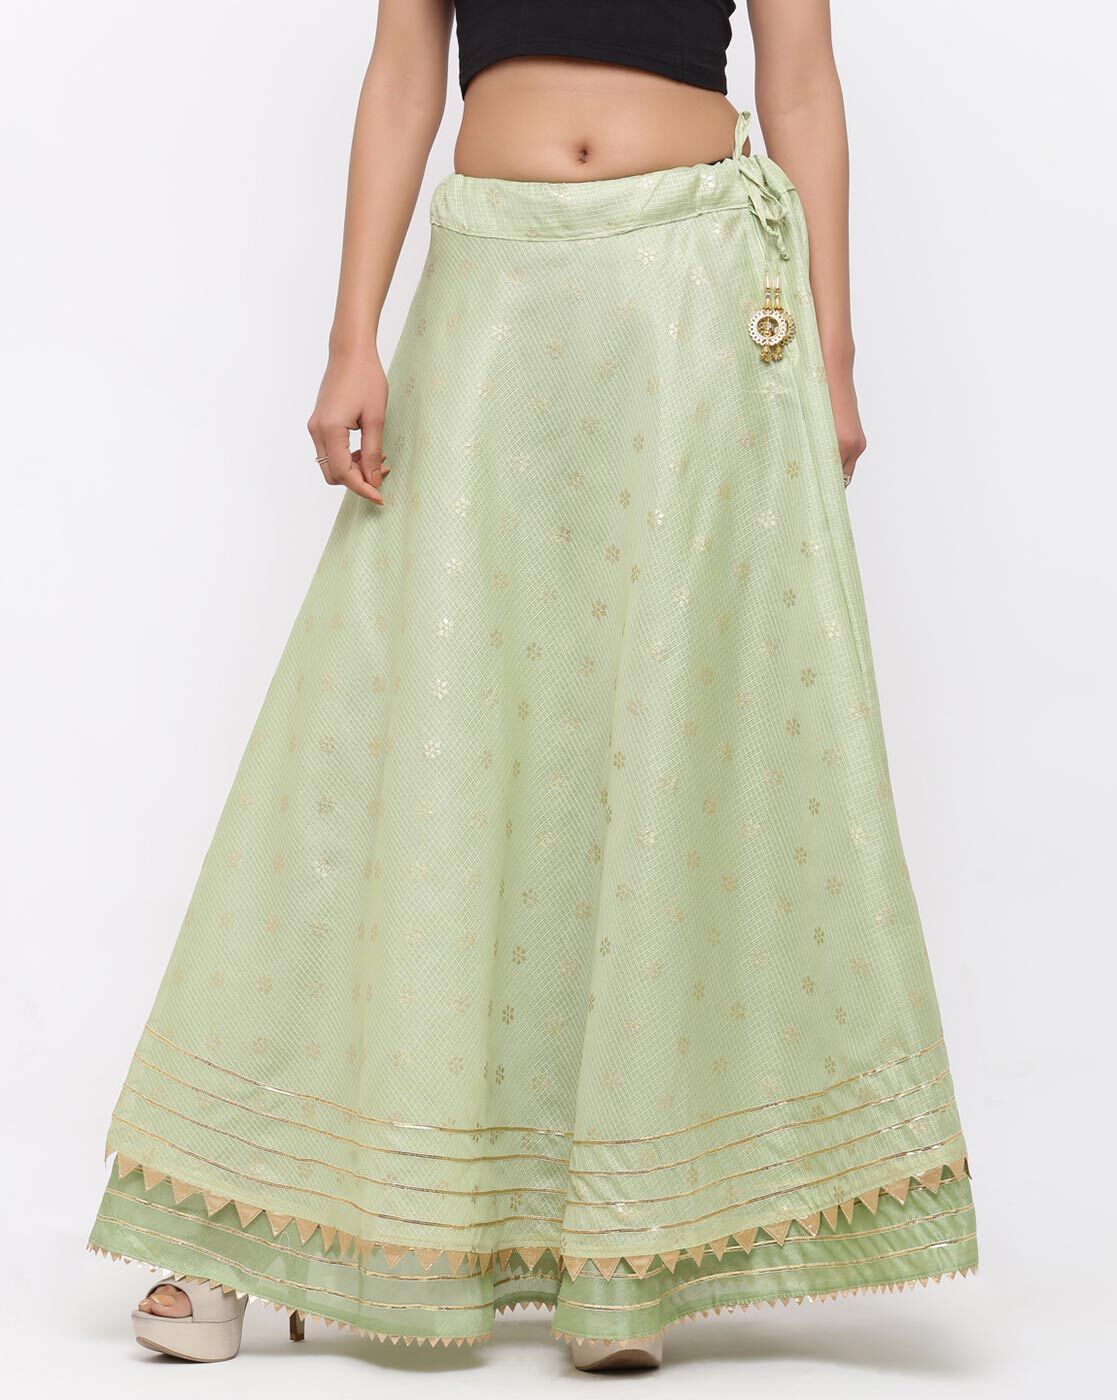 Skirts - Buy Bow Tie Pencil Skirt | Long Pencil Skirt Online in India -  PRATHAA – Prathaa - weaving traditions